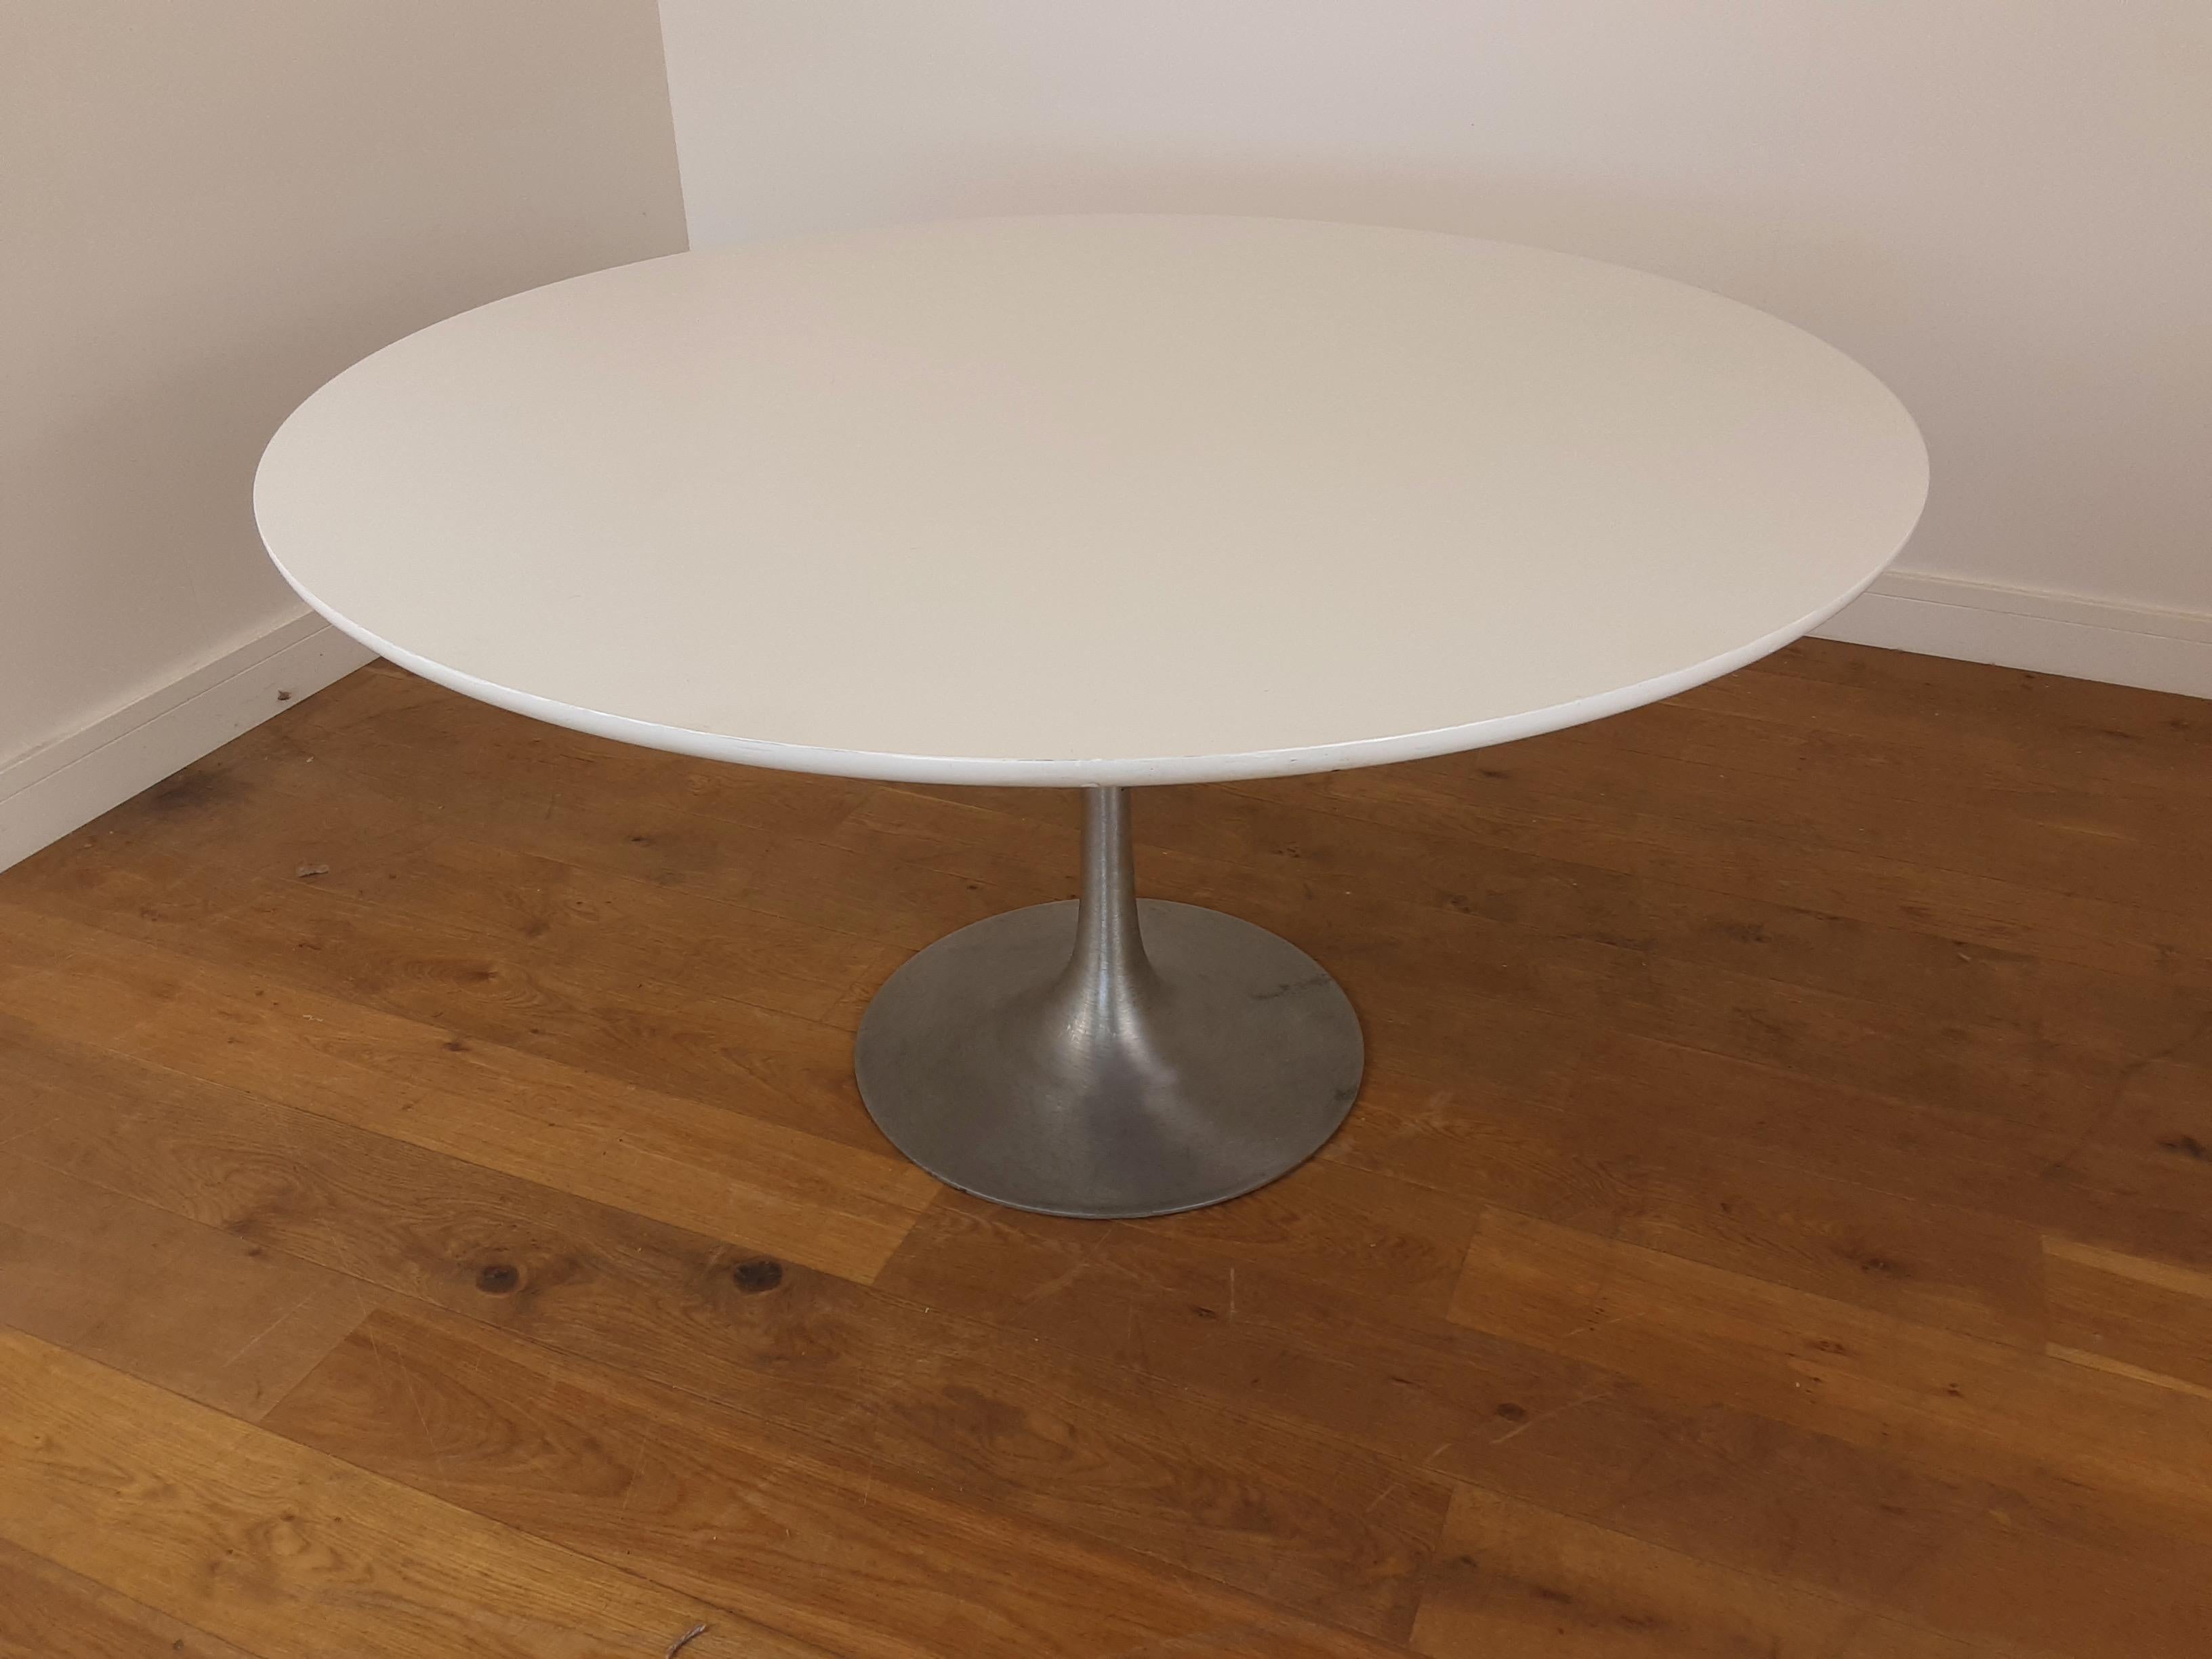 Tulip table with white laminate top on an aluminum base designed by Maurice Burke.
with four very comfortable chairs with slatted acrylic backs and soft leather padded seats on aluminum base.
British, circa 1960.
Measures: Table
Chairs 84 cm H,